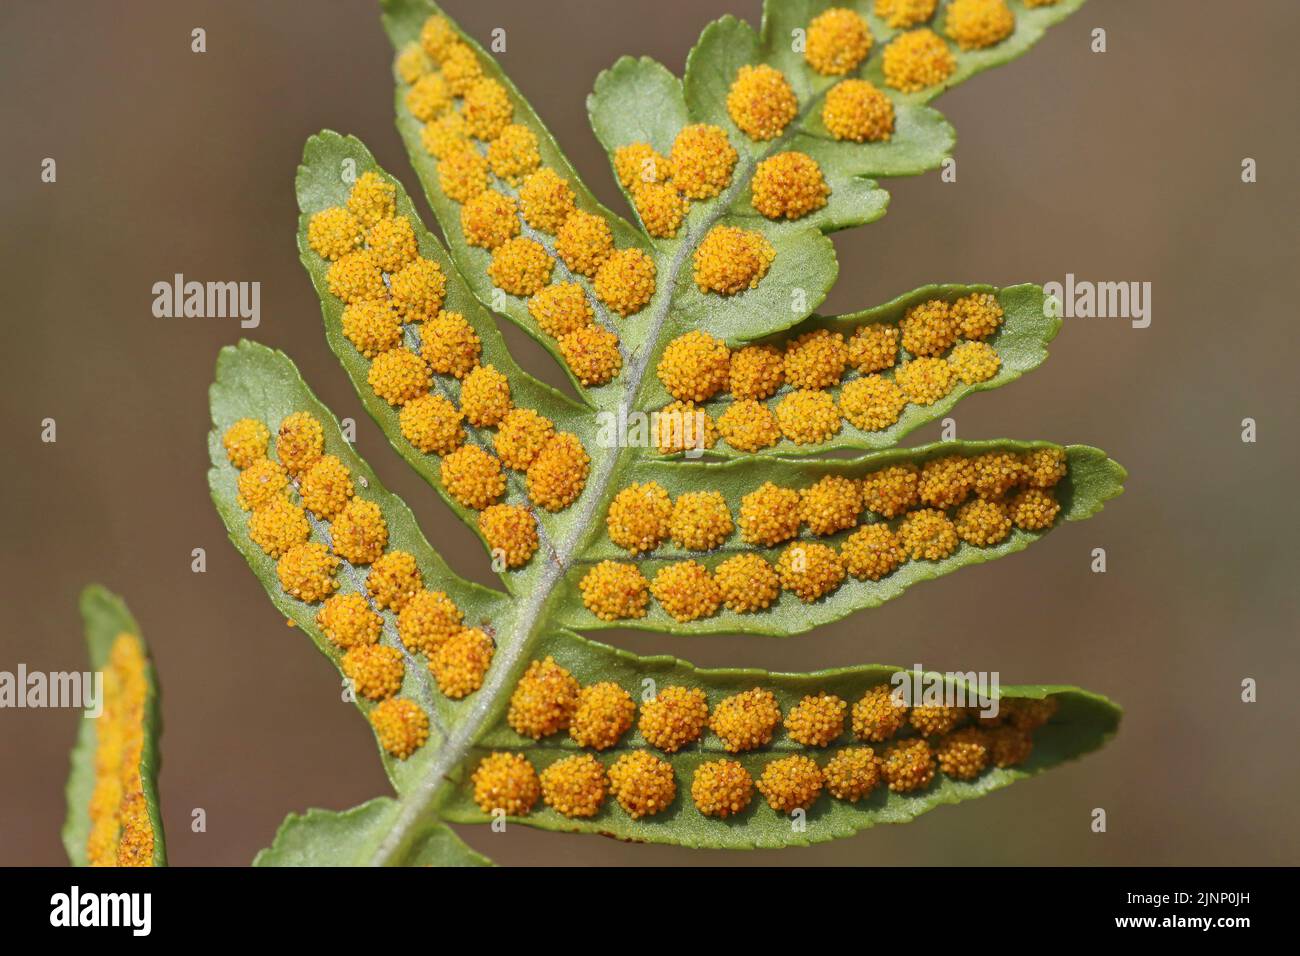 Clusters Of Sporangia On The Underside Of A Common Polypody Fern Polypodium vulgare Stock Photo